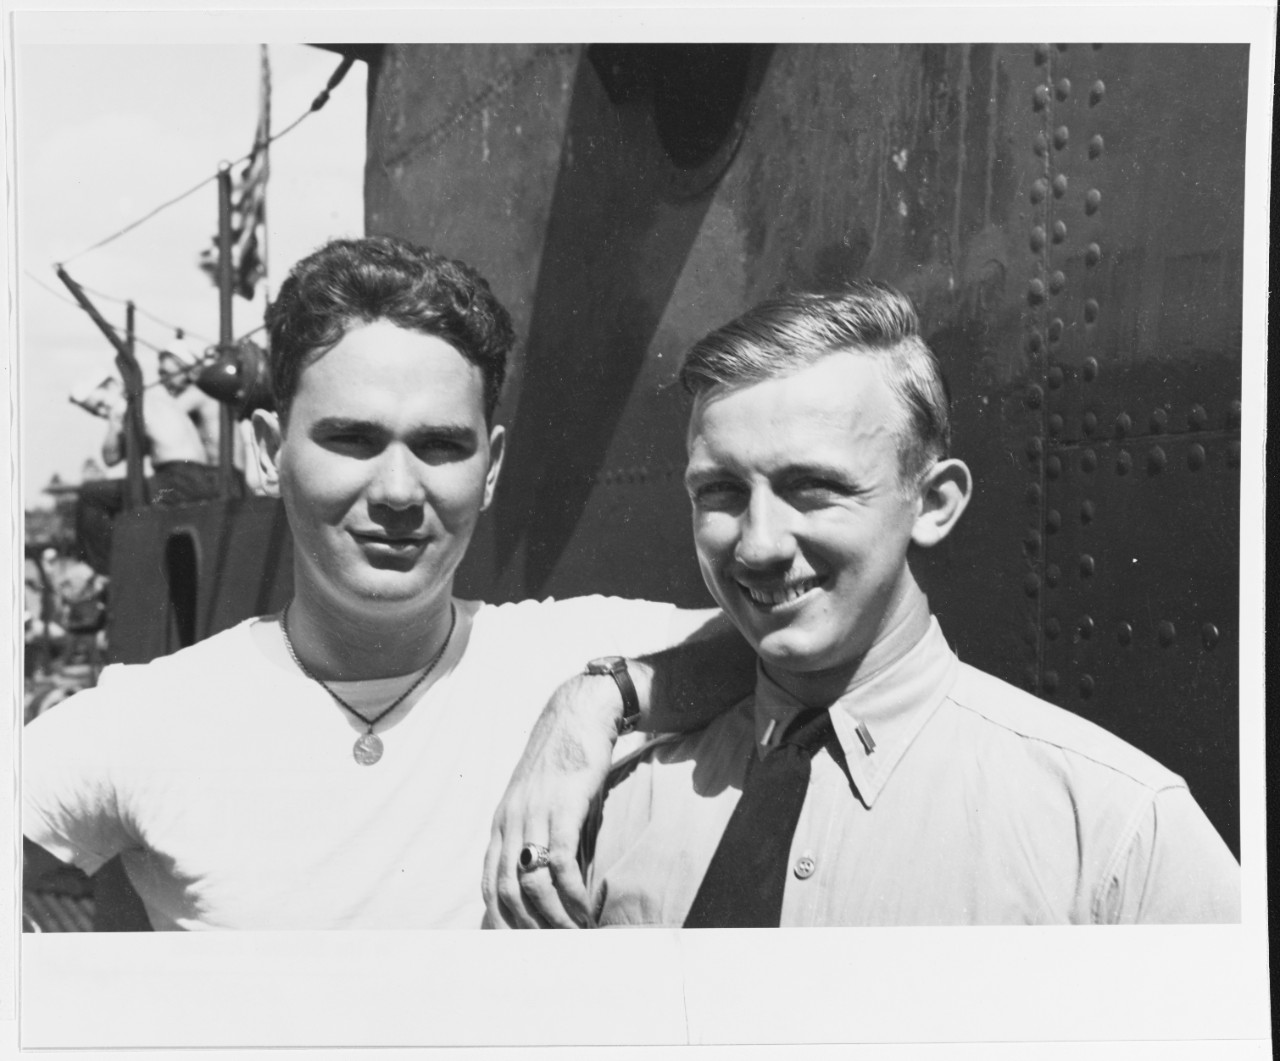 Two of the ship's officers, at the time of her fifth war patrol, in mid-1943. They are (l-r): LTJG Richard S. Garvey, and LTJG John Sincavich, who was lost with Trigger in 1945. 